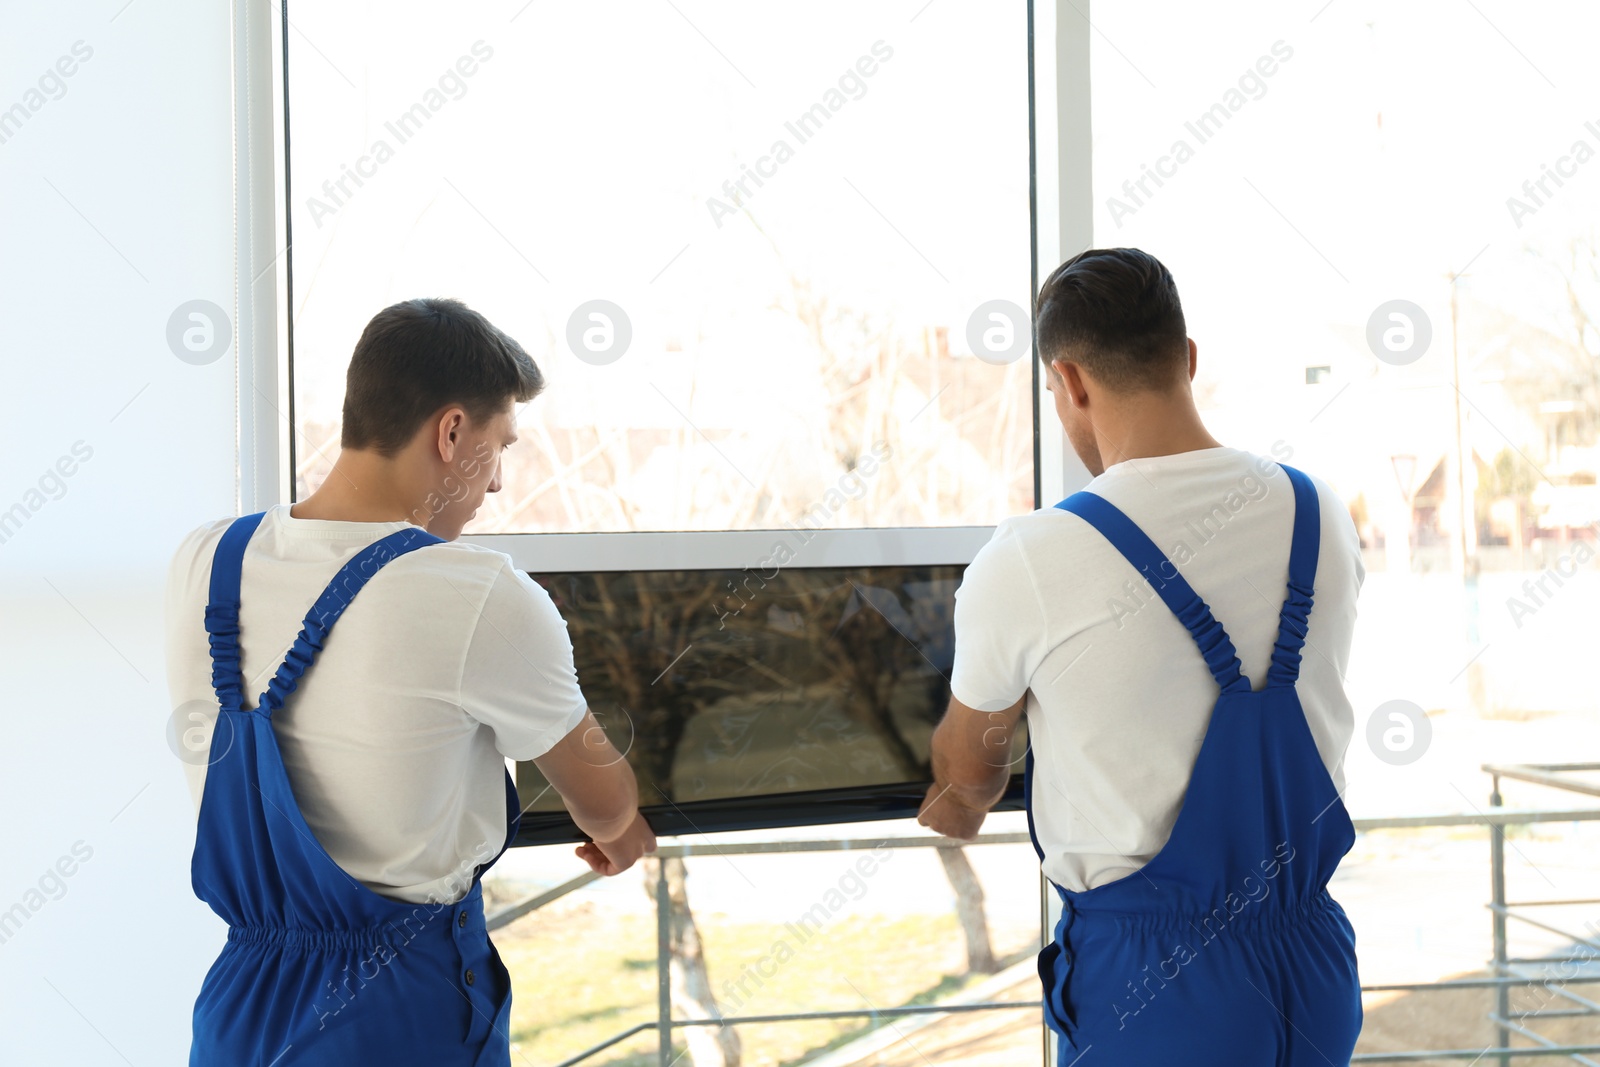 Photo of Professional workers tinting window with foil indoors